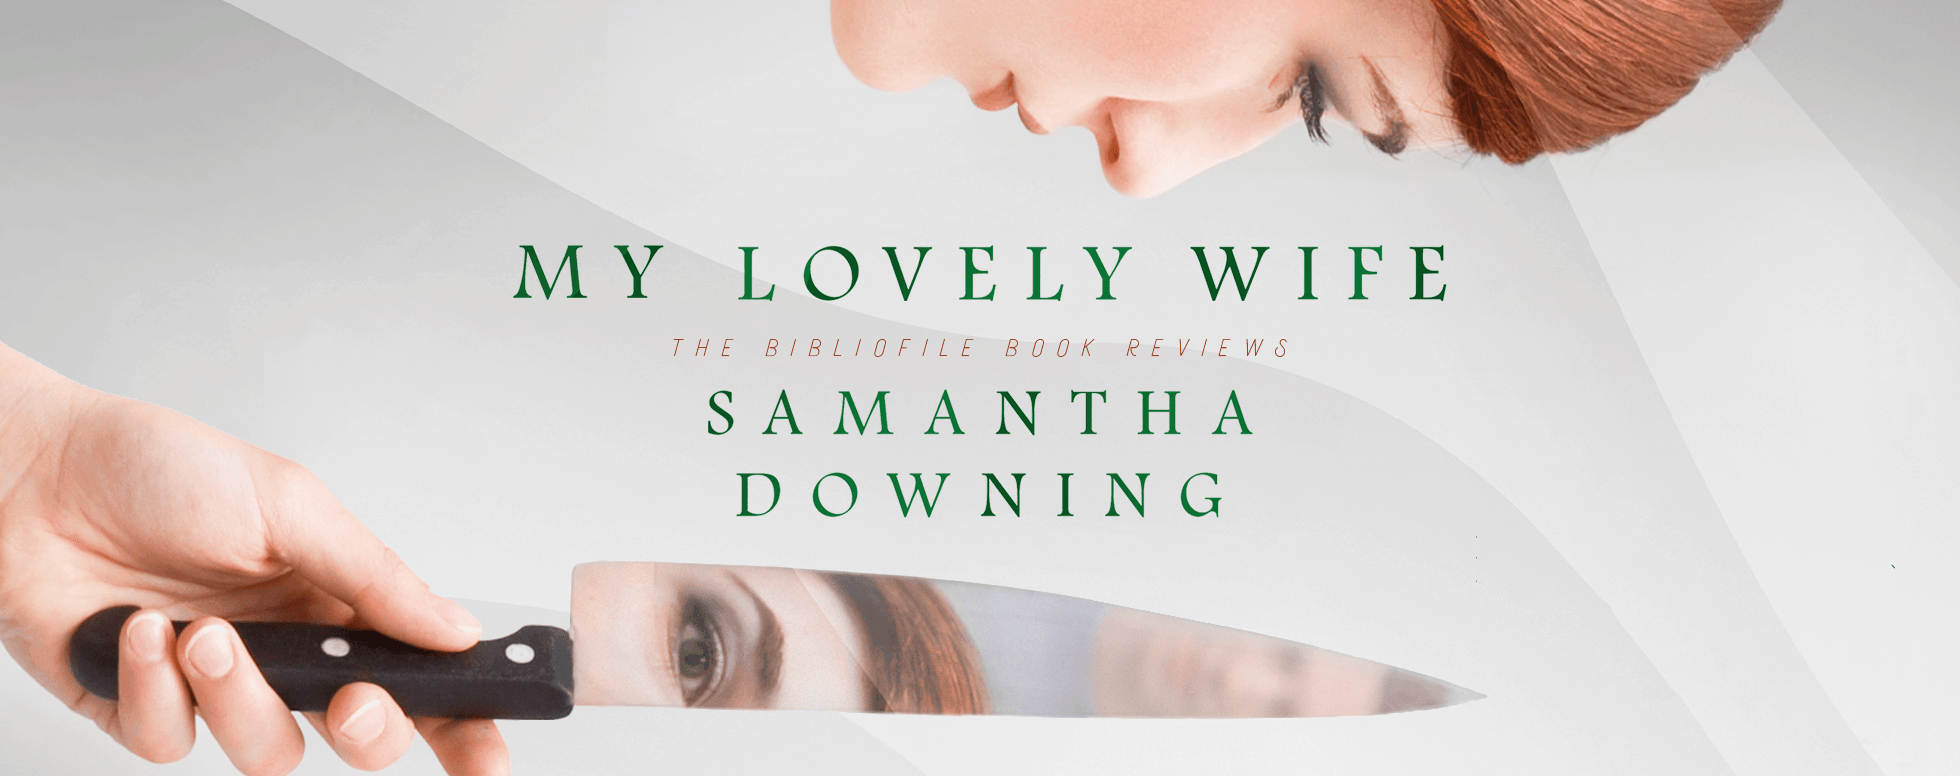 my lovely wife by samantha downing